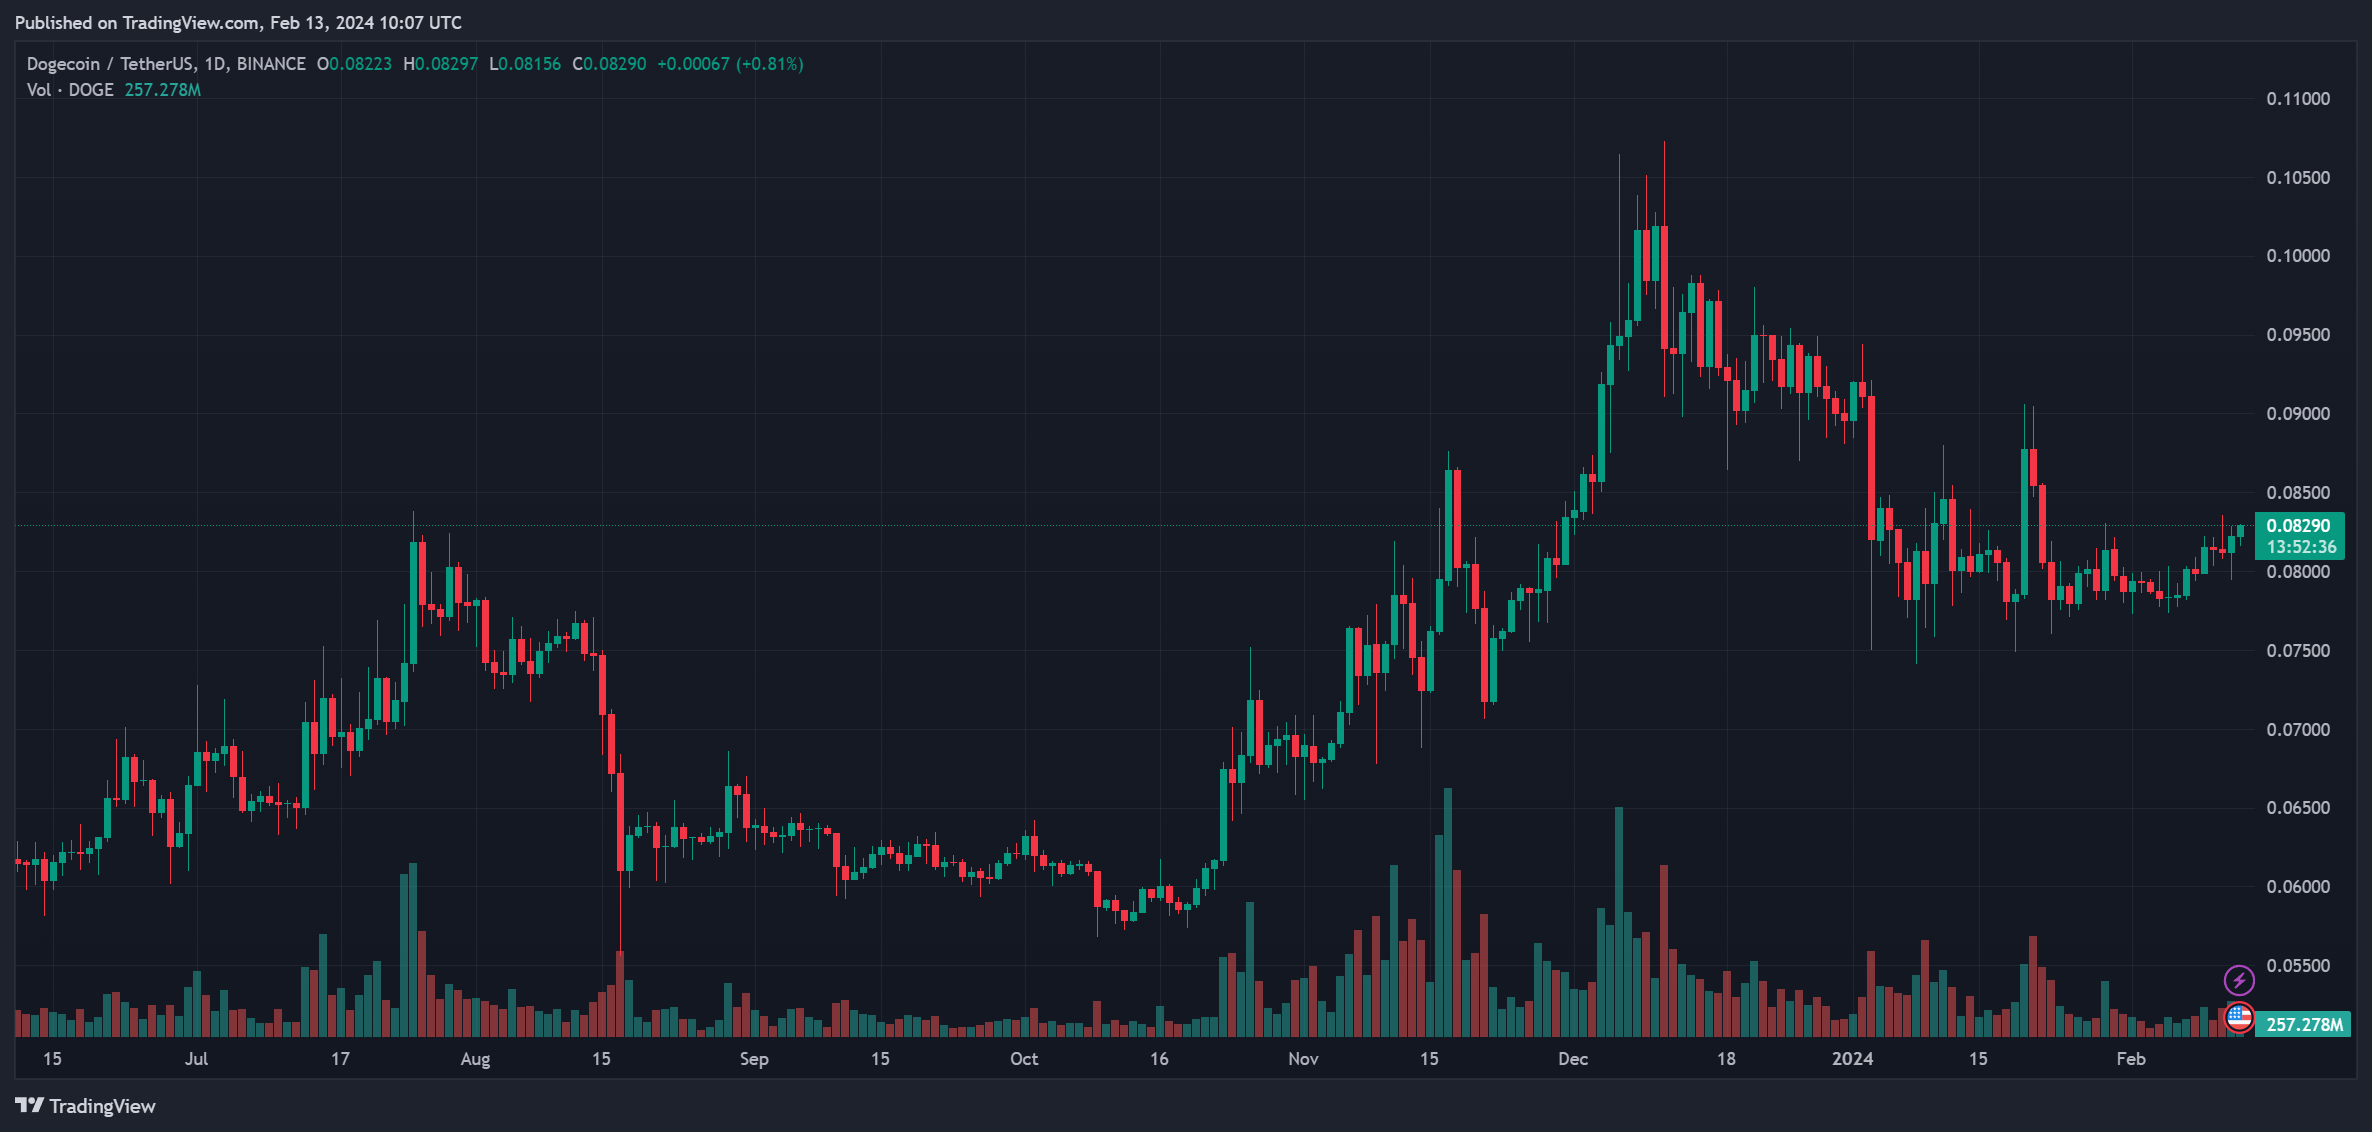 DOGE’s price trends sideways on the daily chart. Source: DOGEUSDT on Tradingview